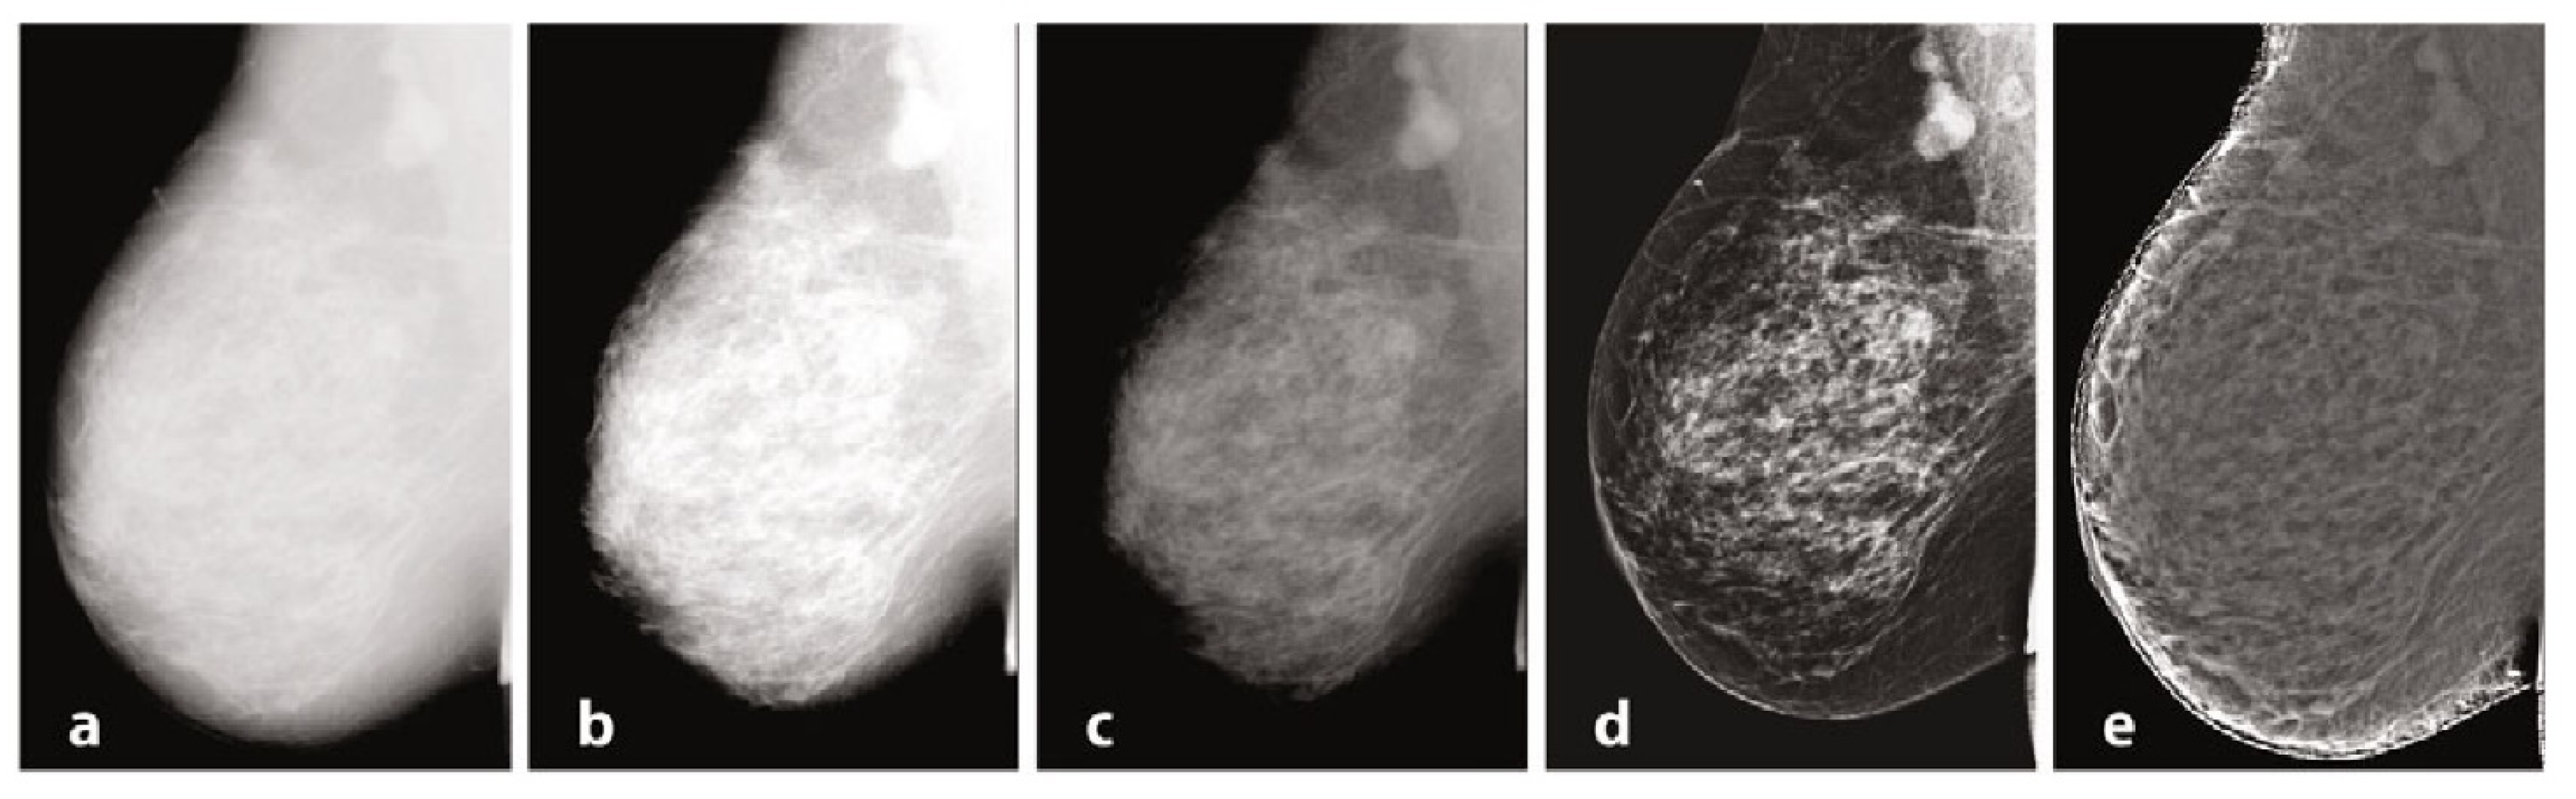 Does Breast Thermo-Imaging Succeed Where Mammograms Fail In The Early  Detection of Breast Cancer?